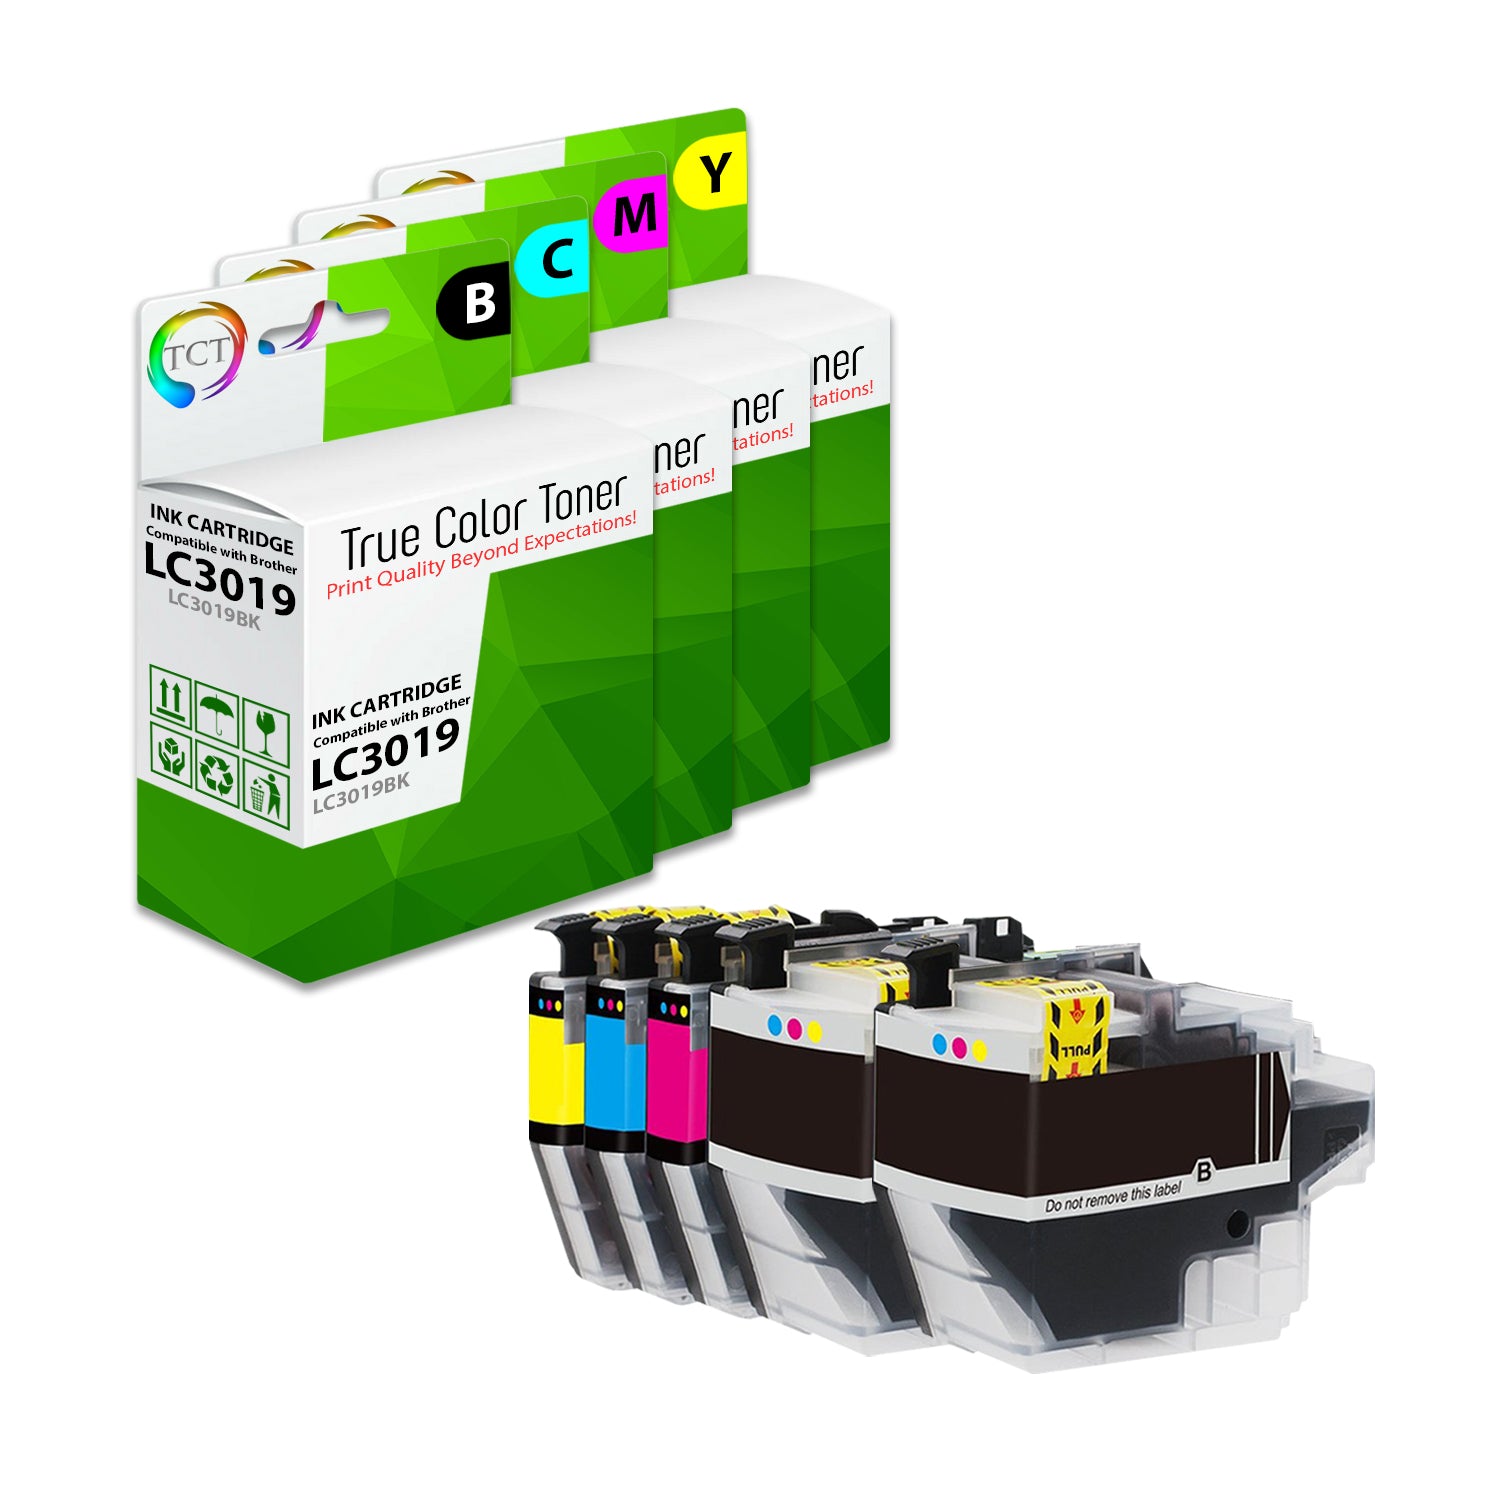 TCT Compatible Super HY Ink Cartridge Replacement for the Brother LC3019 Series - 10PK (B,C,M,Y)